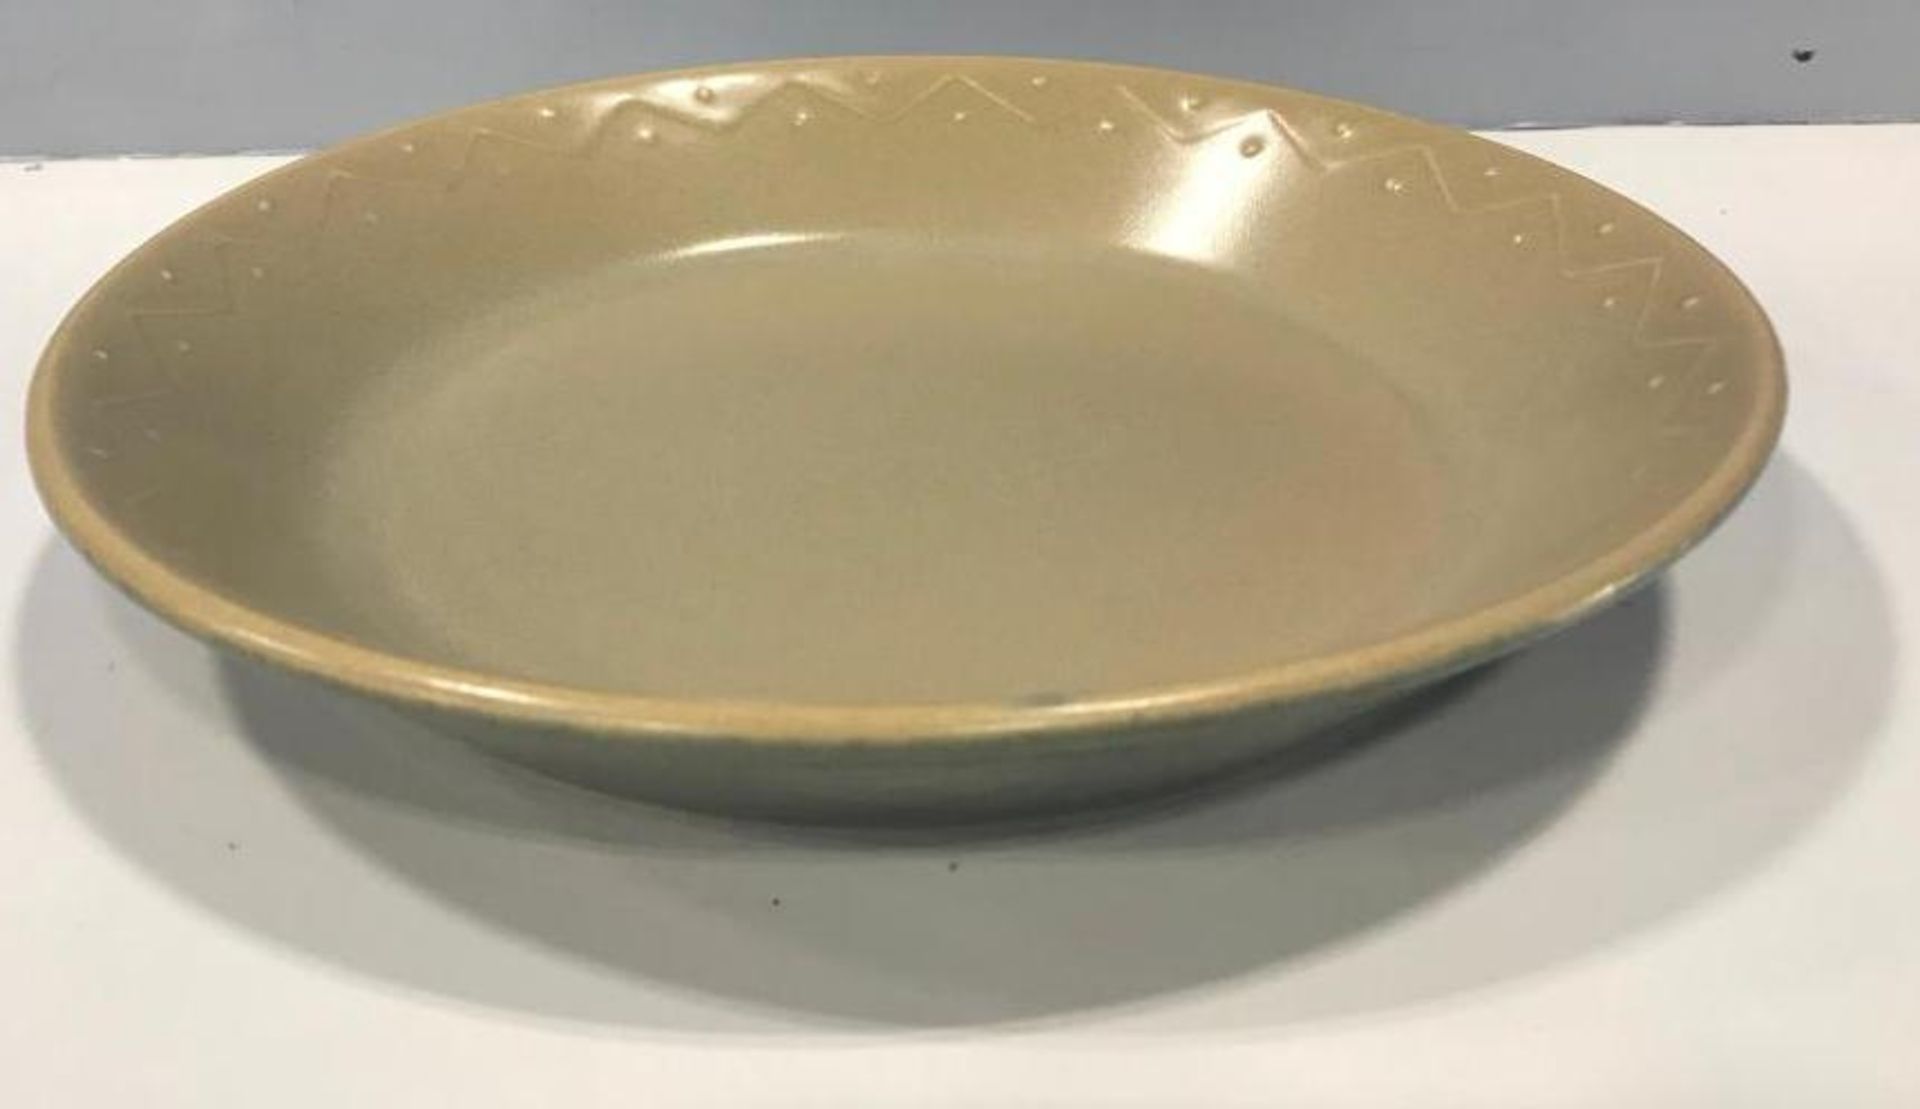 DUDSON GREEN & SAND SALAD BOWL 9.5" - 18/CASE, MADE IN ENGLAND - Image 3 of 6